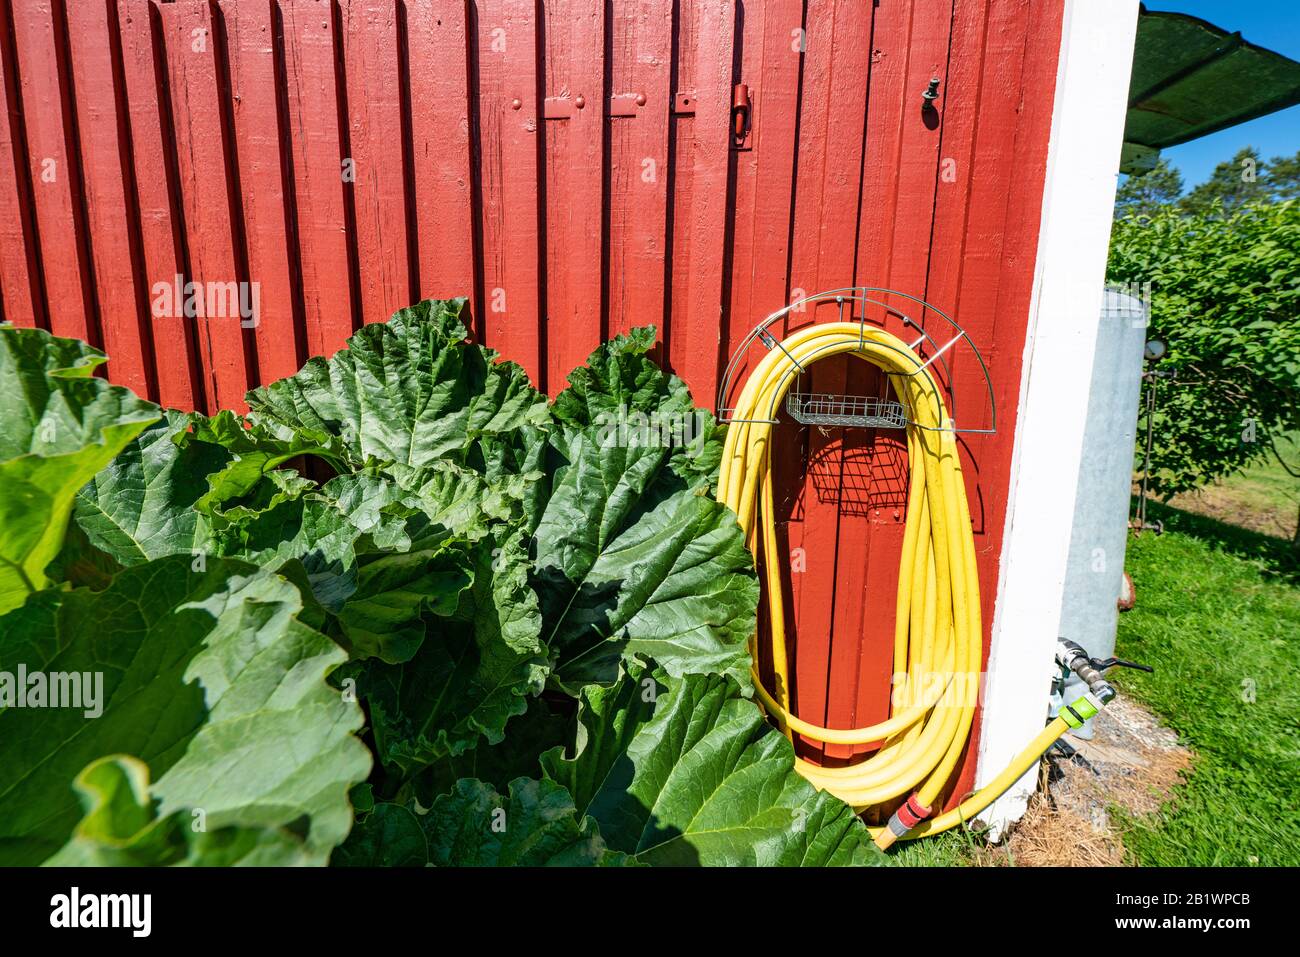 Yellow rubber watering tube for plants watering hangs on red wooden wall of traditional Swedish garden shed, rhubarb with very big green leaves grows Stock Photo